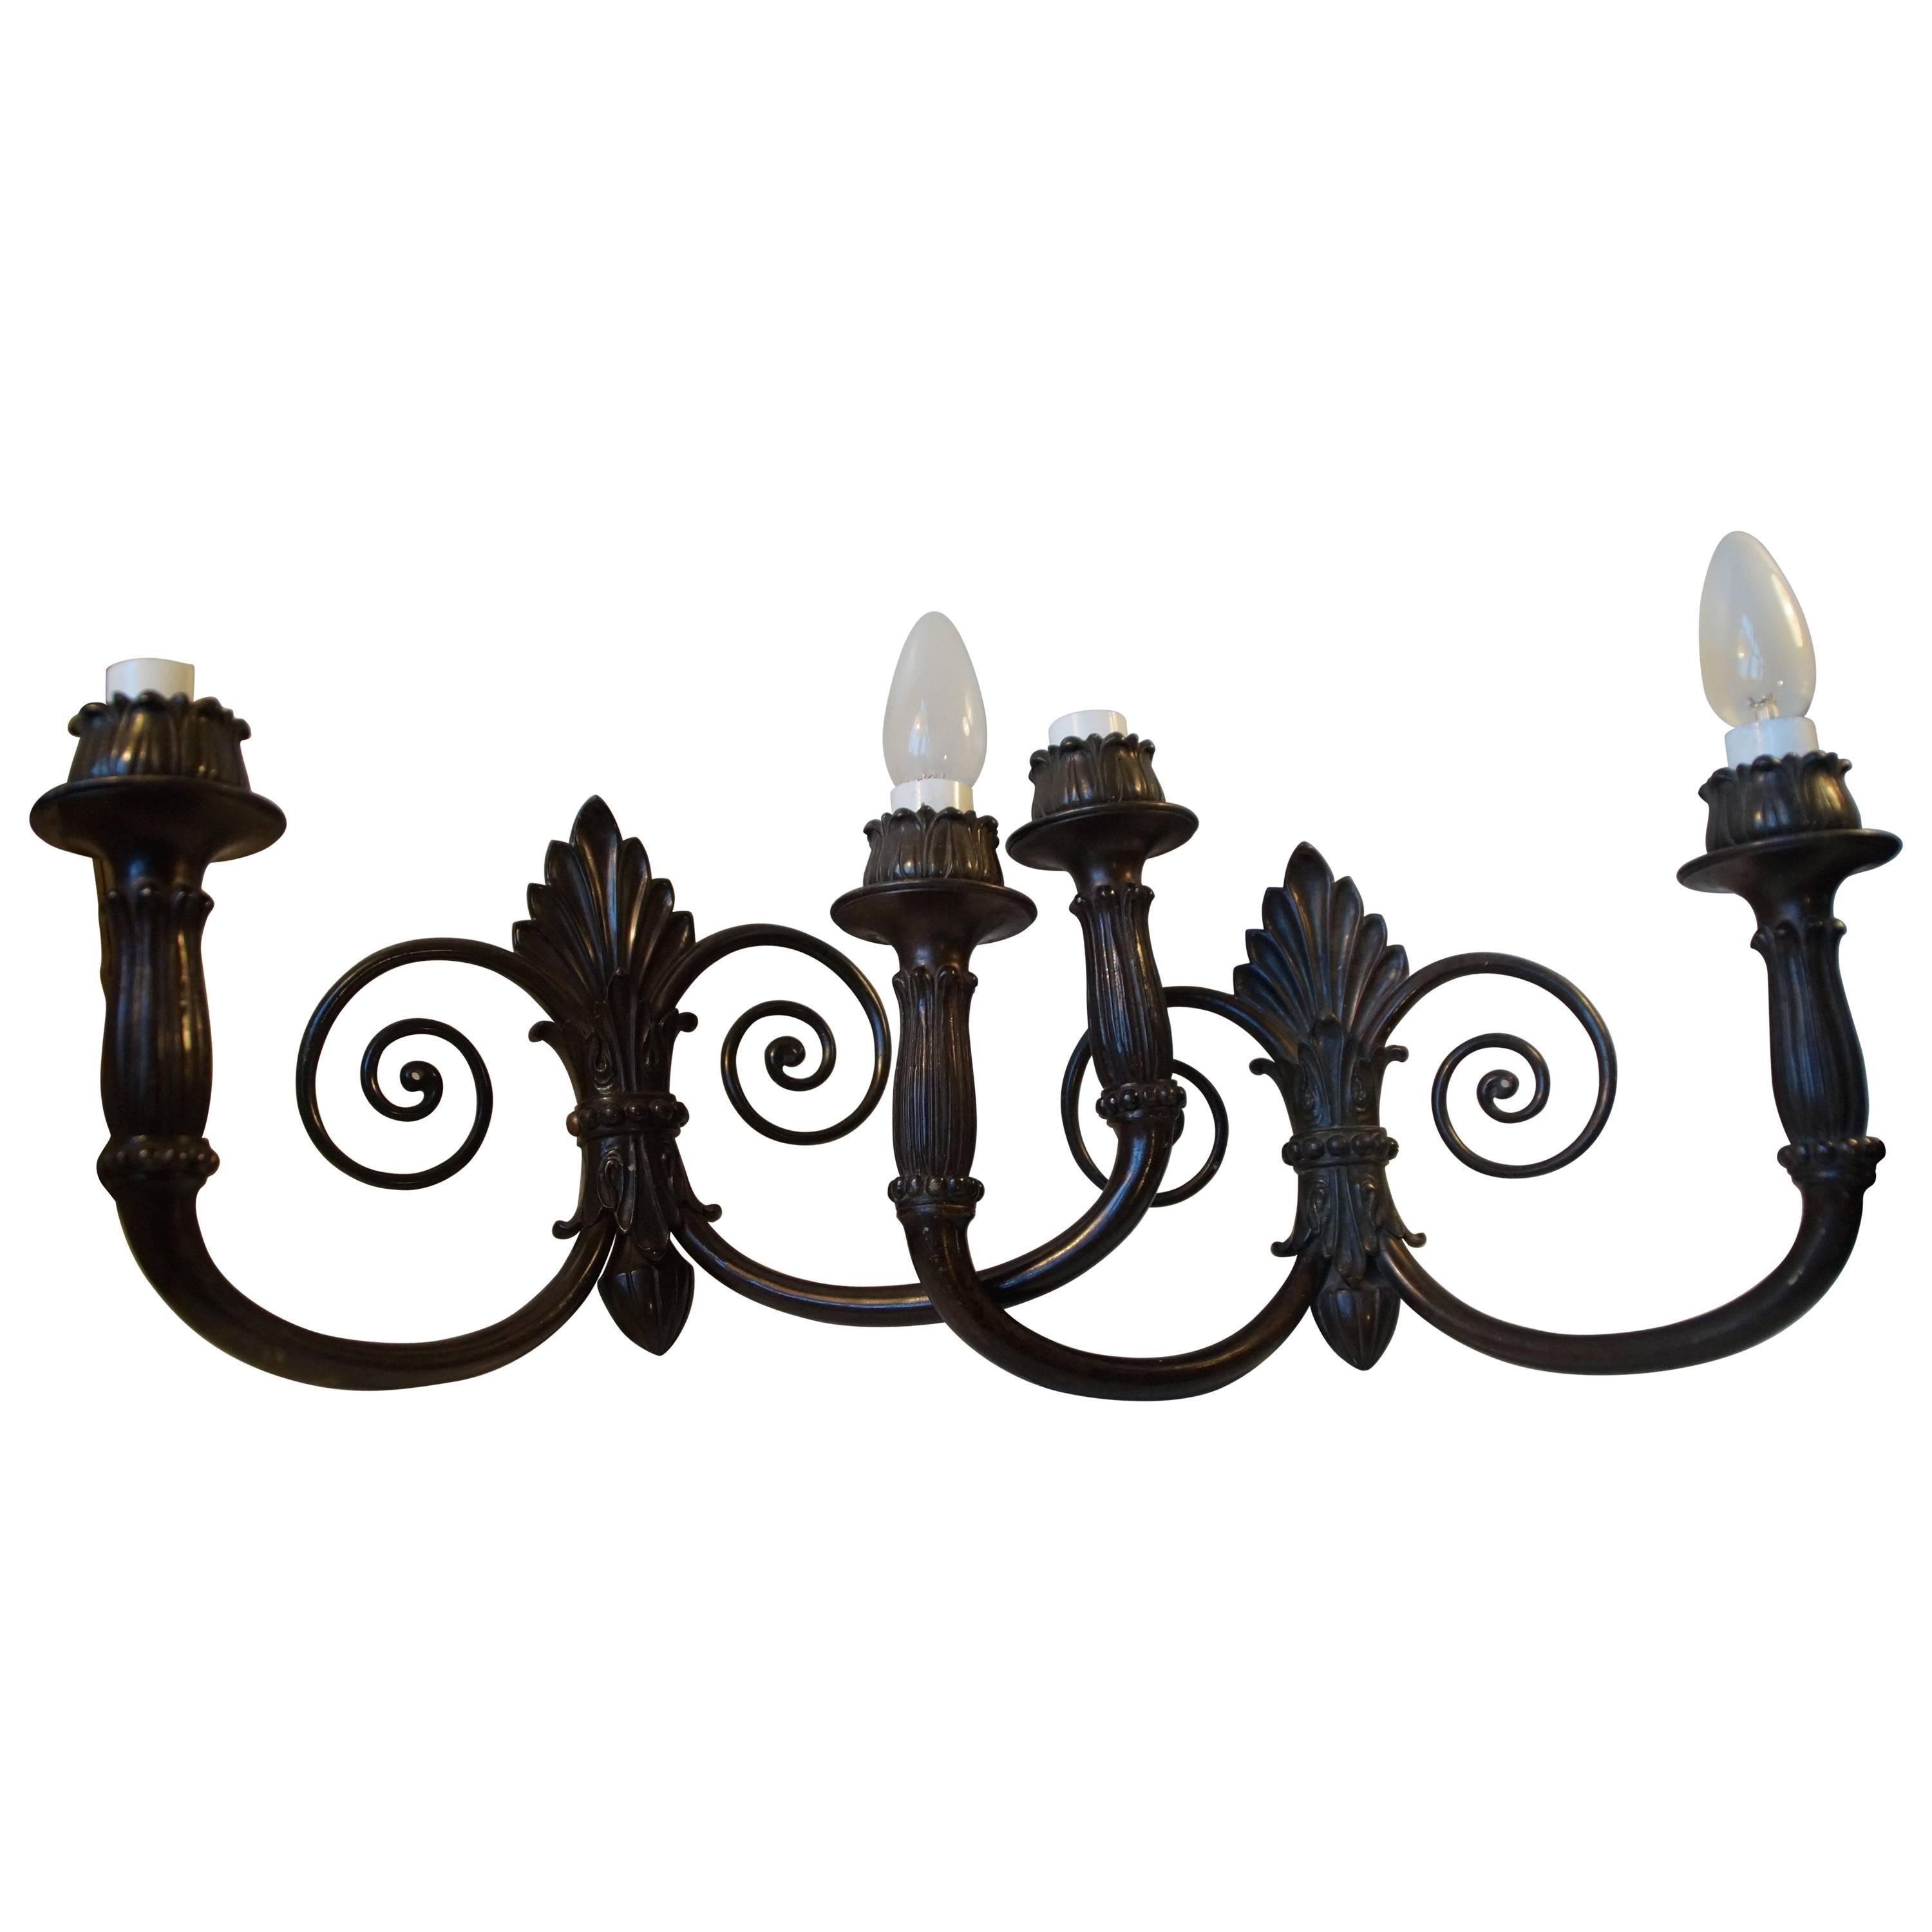 Pair of Antique French Two-Armed Bronze Sconces with 'Swirl', Early 20th Century